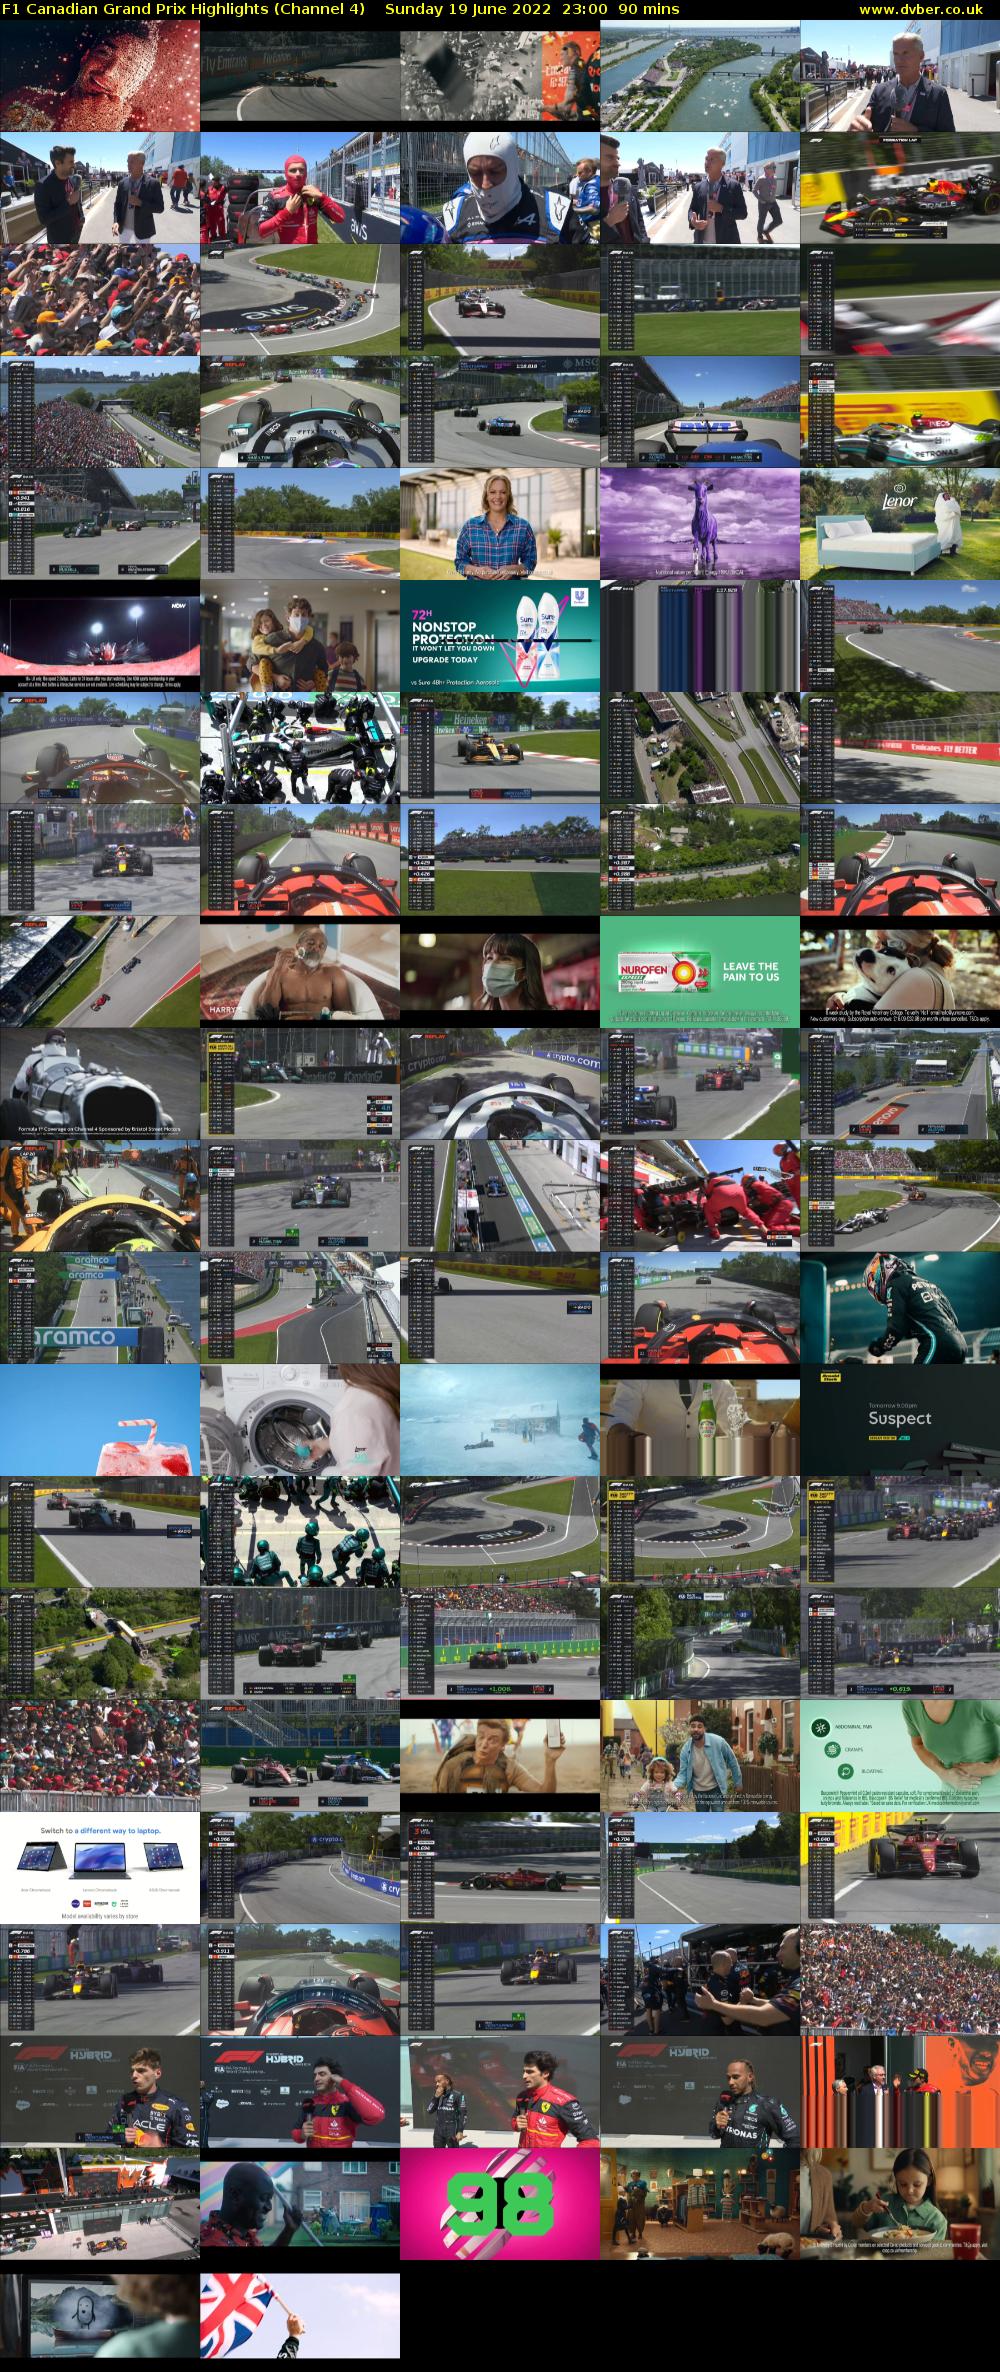 F1 Canadian Grand Prix Highlights (Channel 4) Sunday 19 June 2022 23:00 - 00:30